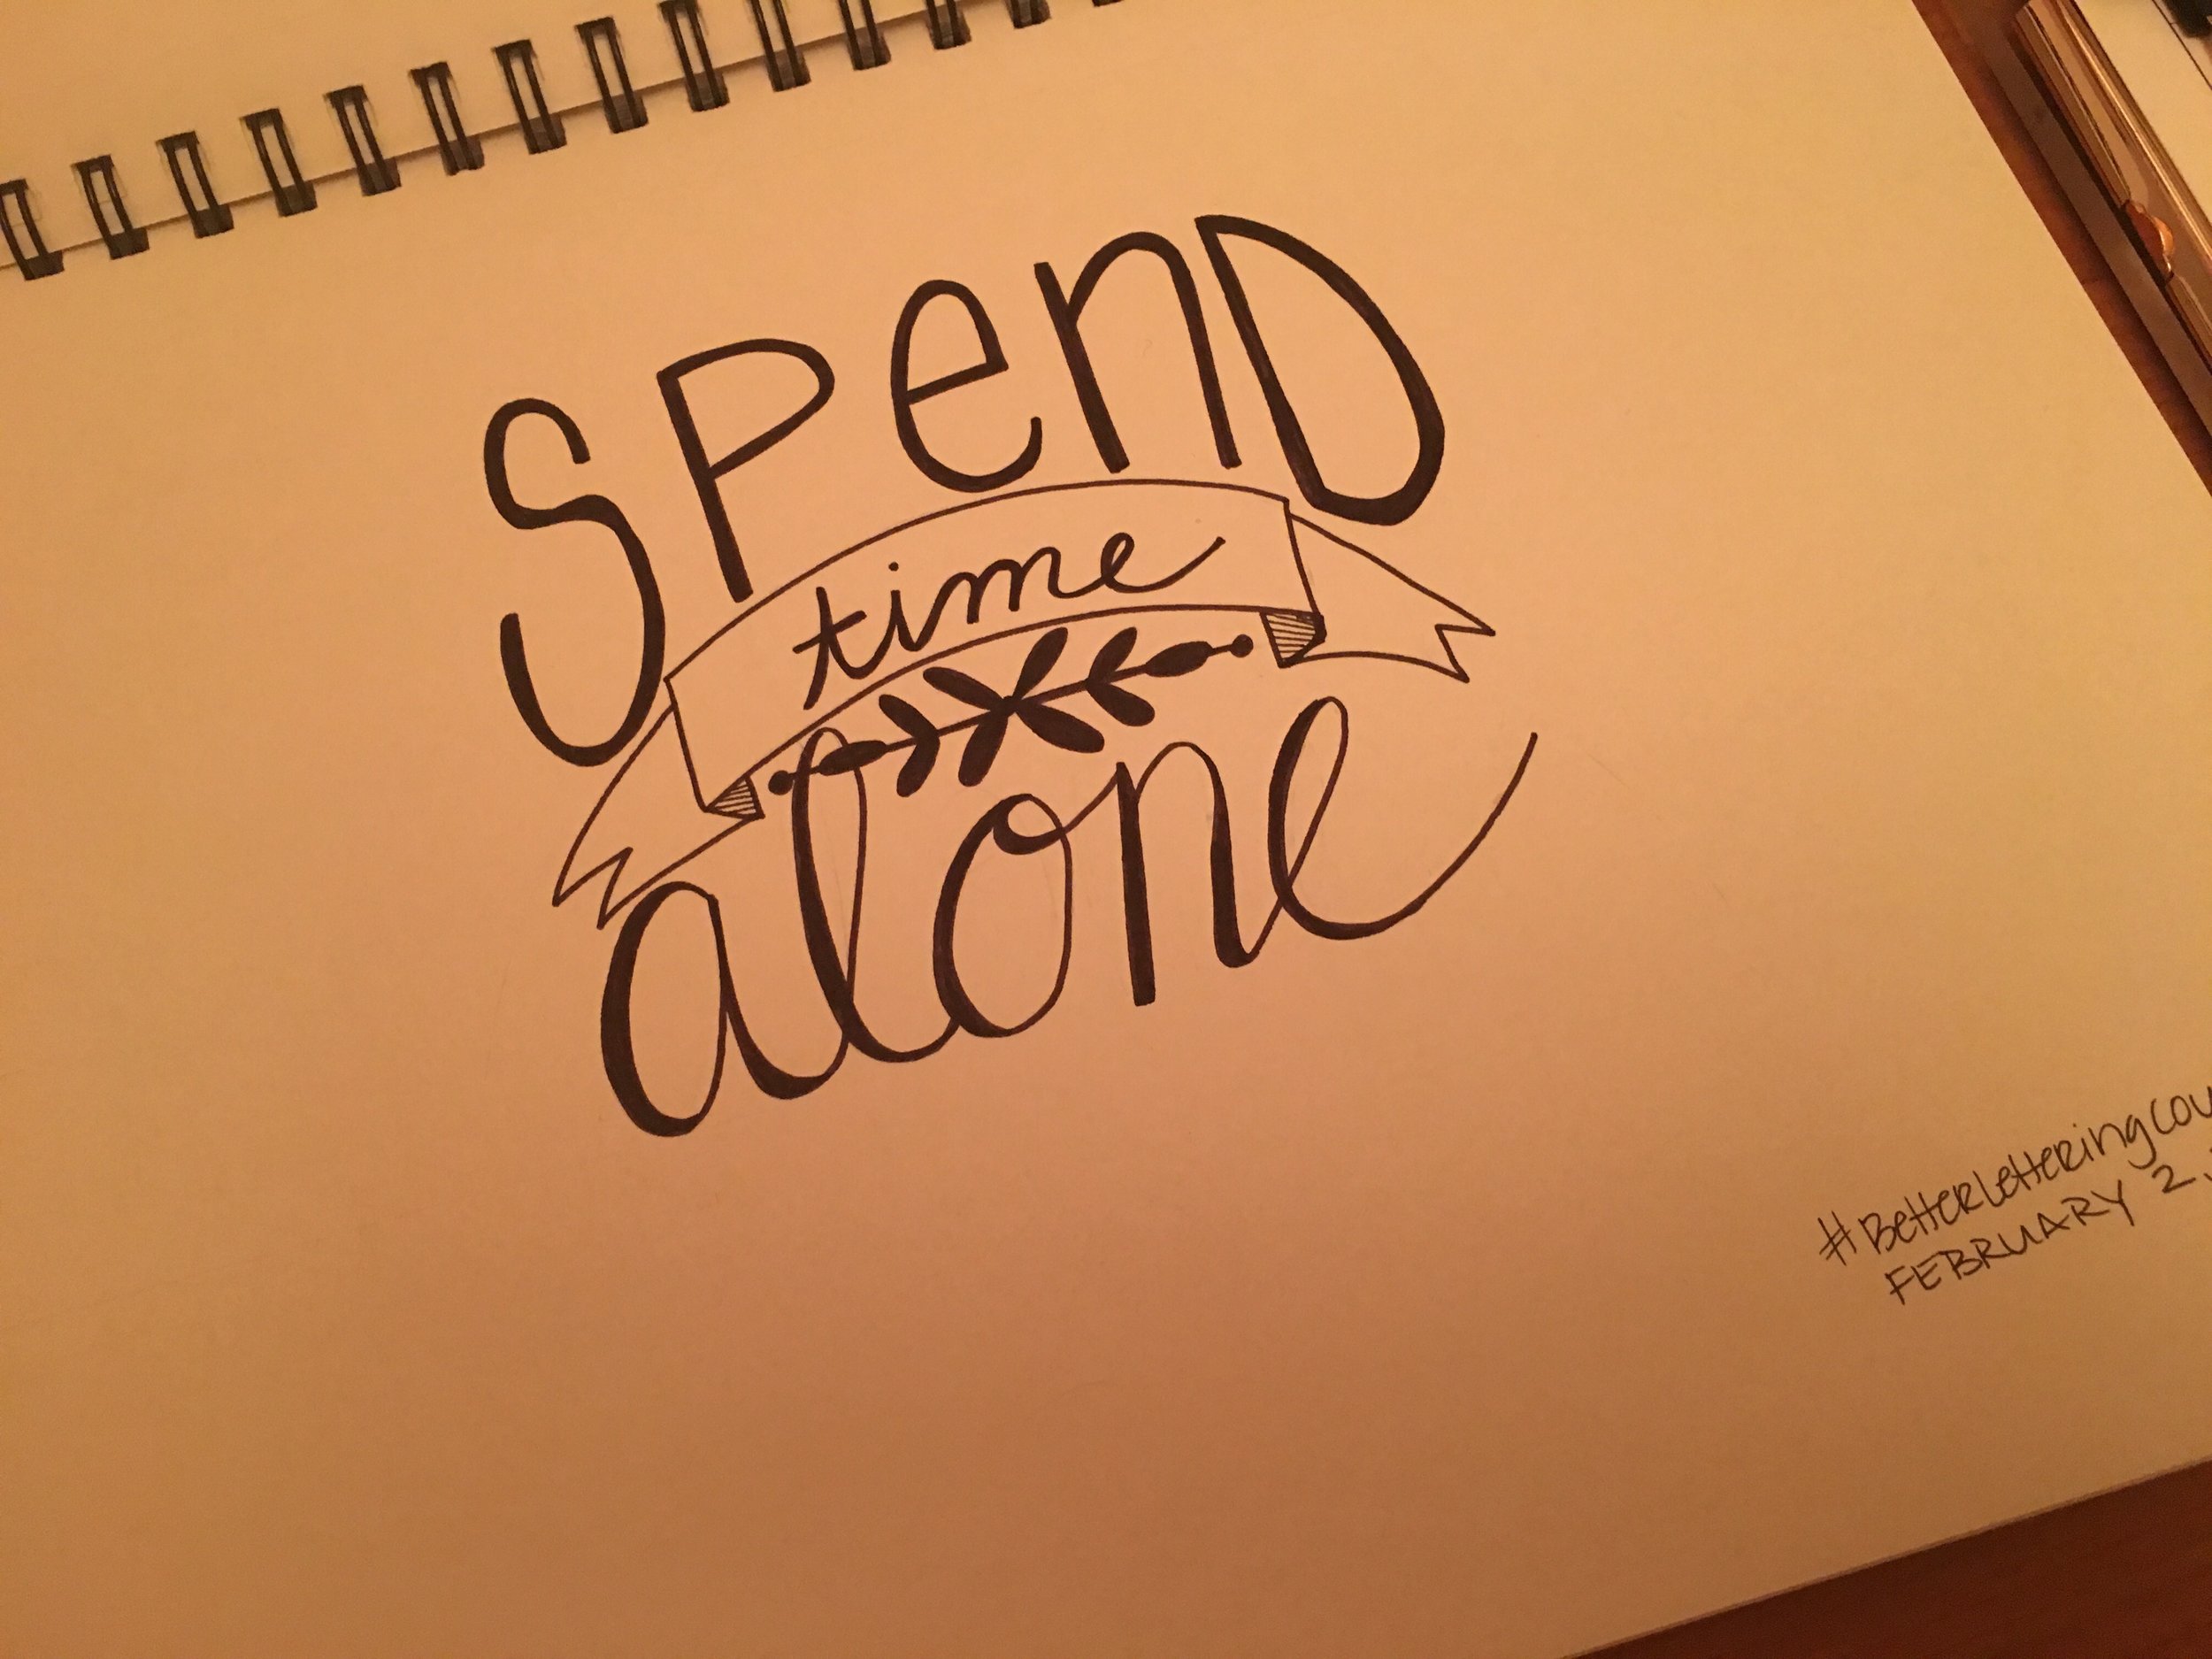 hand lettering by emily reeves dean that says spend time alone